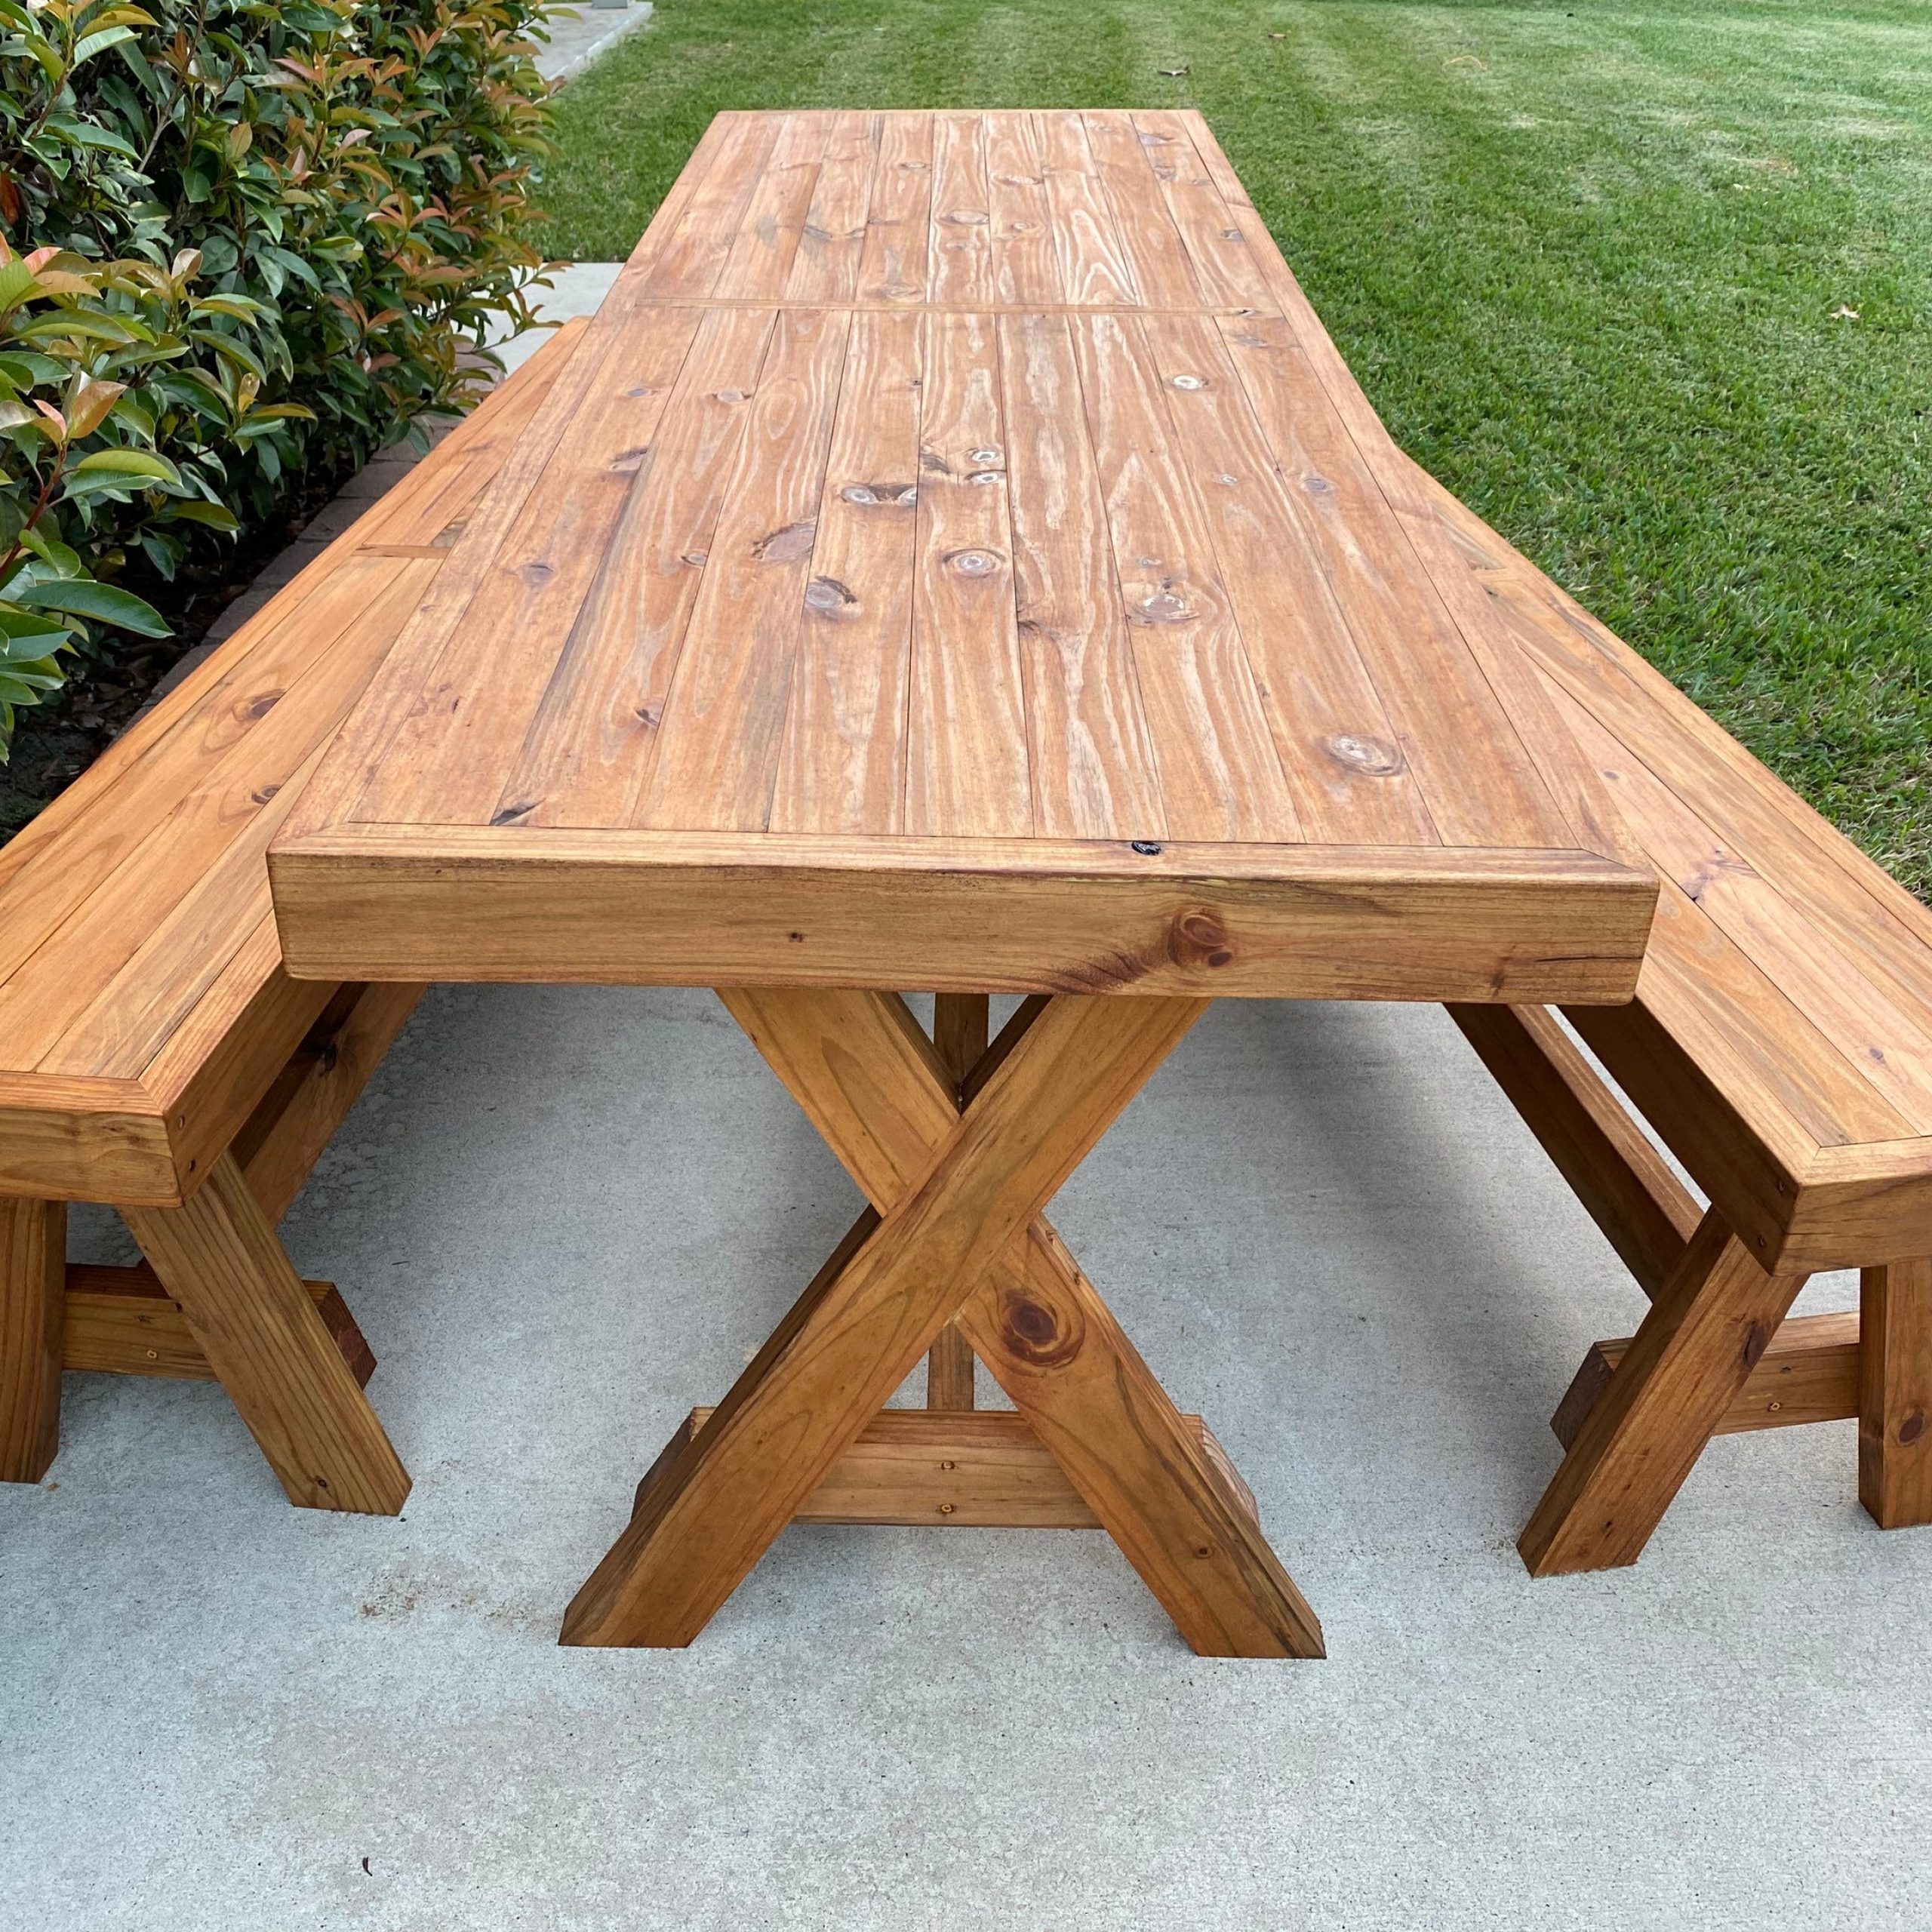 Warm Walnut Outdoor Tables With Regard To Popular Outdoor Walnut Table – Etsy (View 4 of 15)